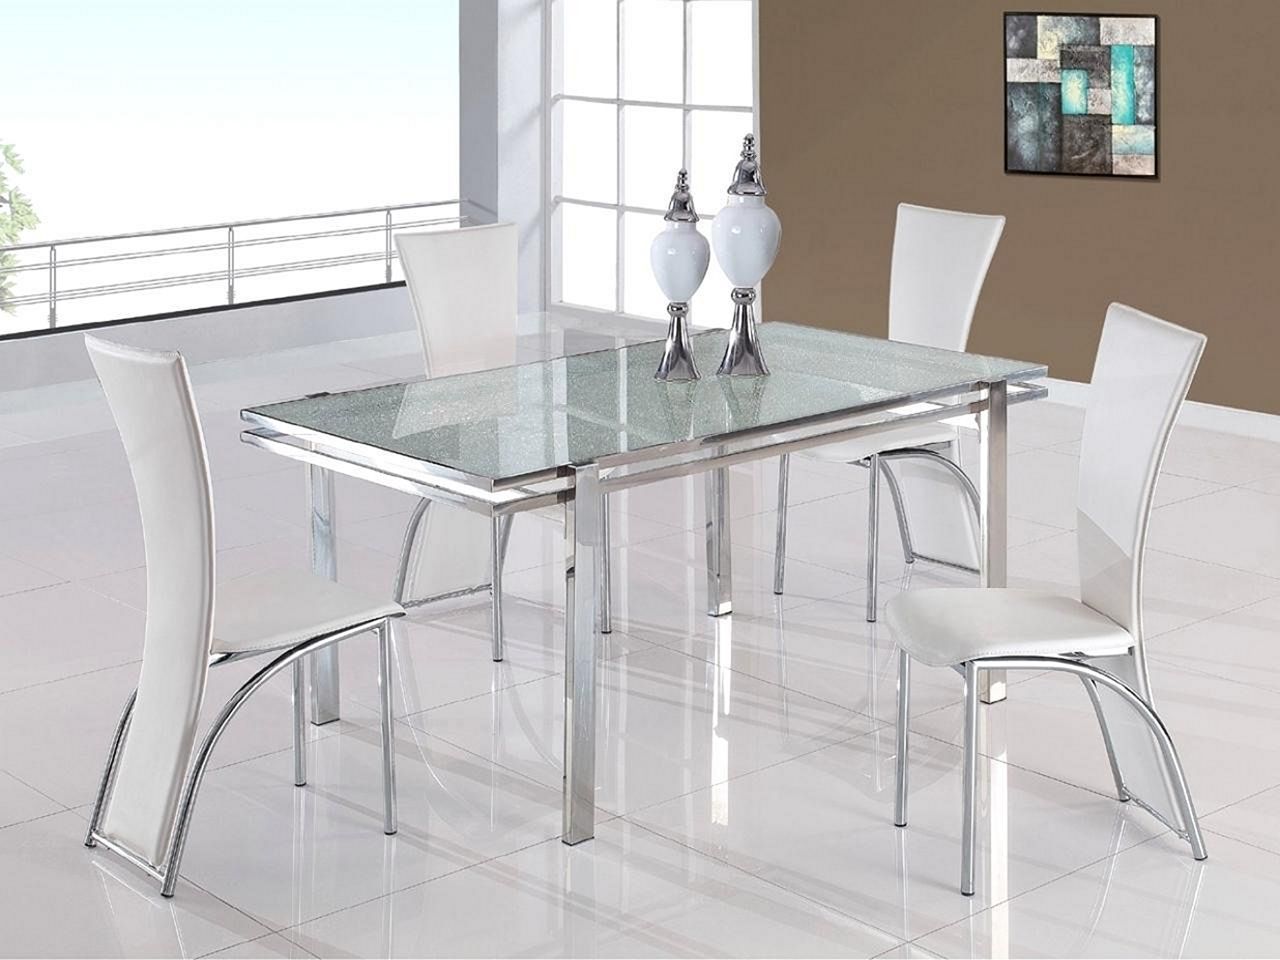 Tips For Choosing the Most Appropriate Dining Table and Dining Chairs